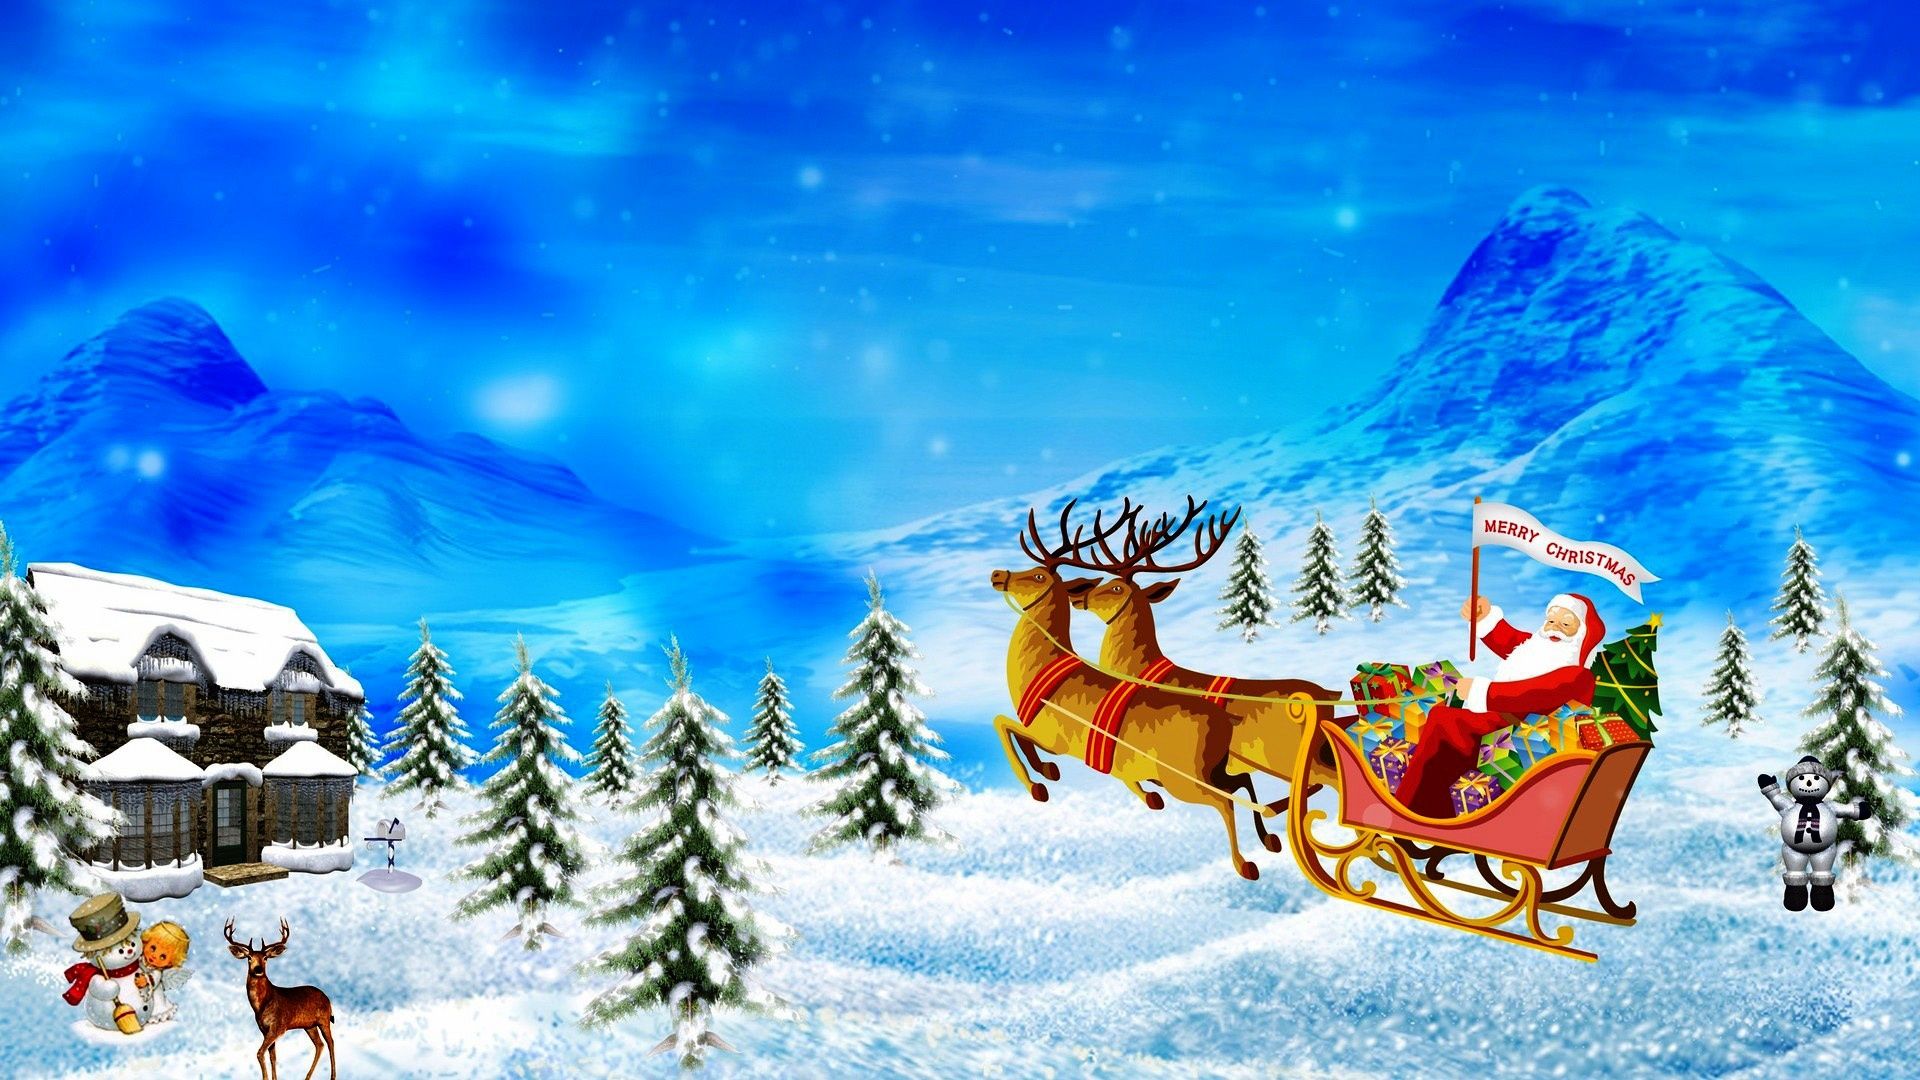 Merry Christmas Wallpapers 1920x1080